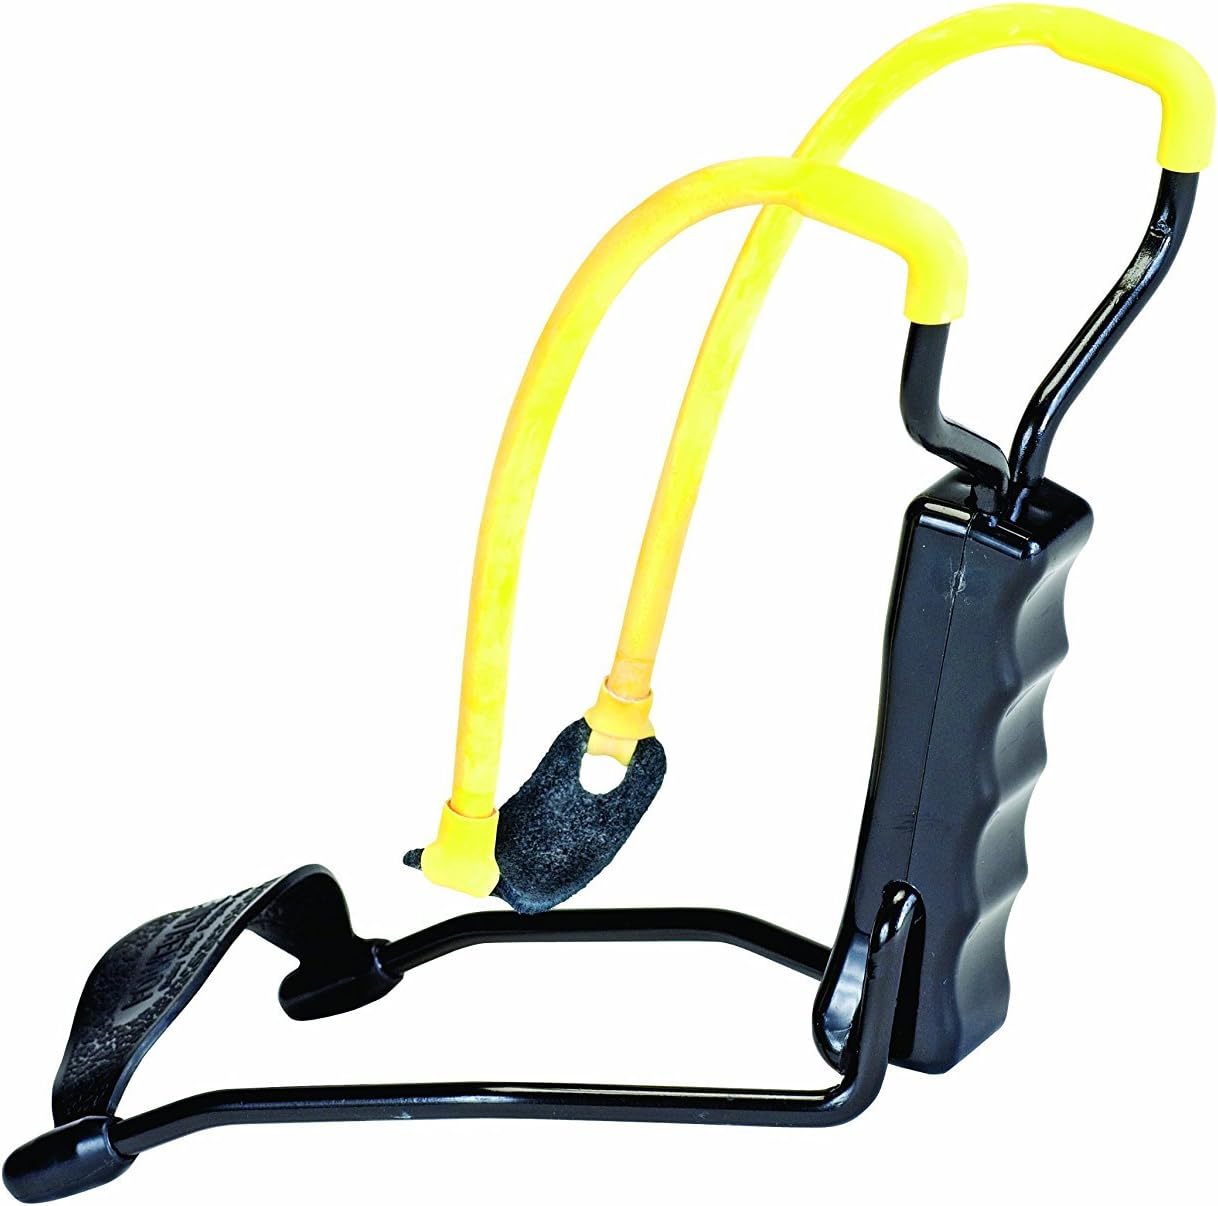 I've tried the triple tube slingshots and like this one better. It' simple, there are no tubes to tangle, no different-sized tubes to throw your shot off. It' accurate enough.